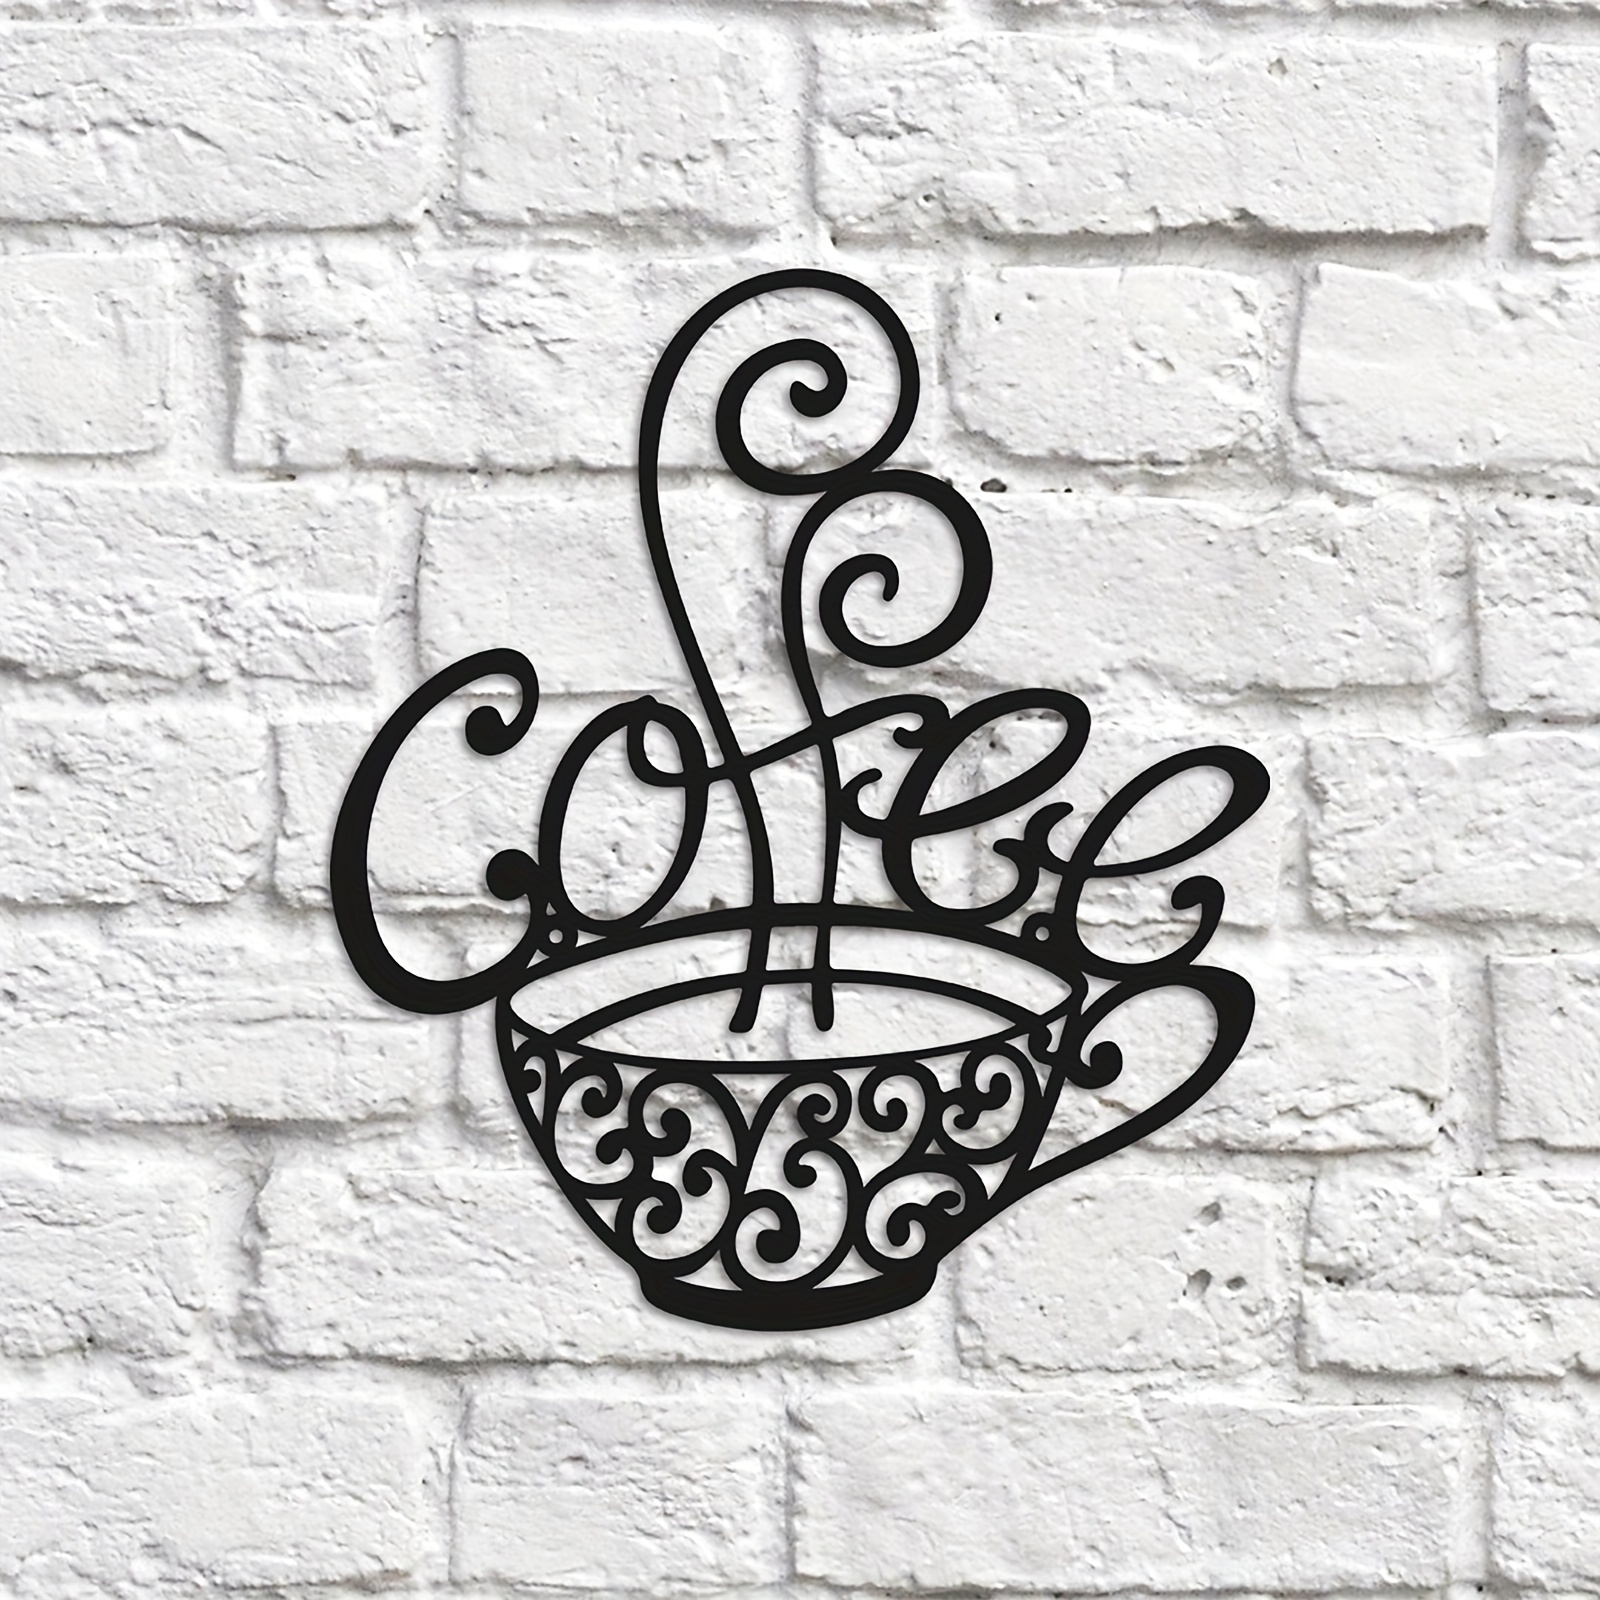  Metal Coffee Cup Wall Art Decor Wire Coffee Sign Wall Cafe  Themed Wall Art Decoration For Coffee Shop Kitchen Restaurant Metal Wall  Sign: Home & Kitchen